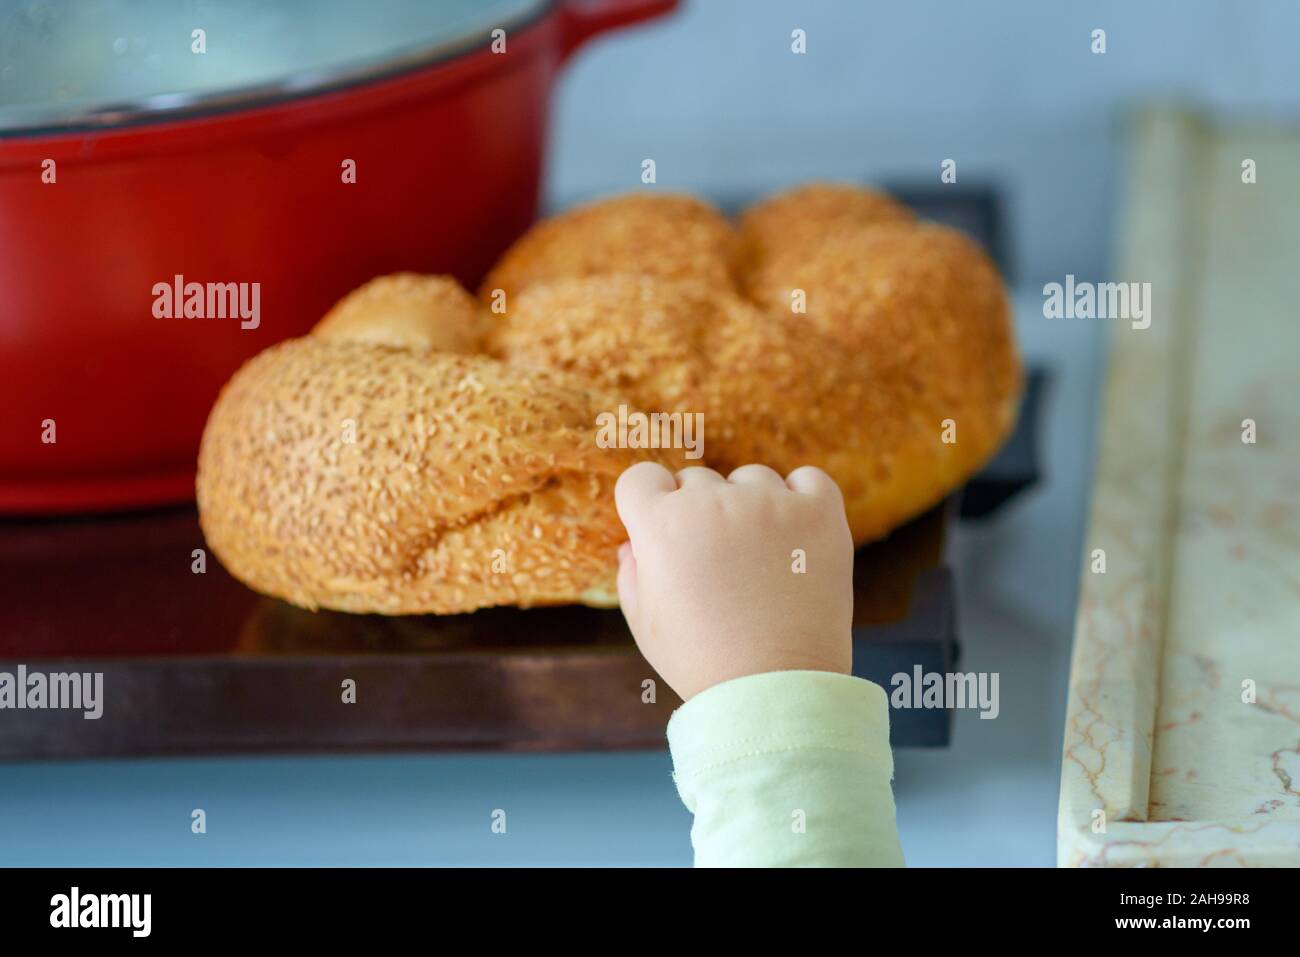 https://c8.alamy.com/comp/2AH99R8/the-hand-of-a-hungry-child-hold-and-break-a-piece-of-bread-a-kids-hand-tearing-a-piece-of-challah-hot-plate-for-the-sabbath-pot-with-traditional-food-and-challah-special-bread-in-jewish-cuisine-2AH99R8.jpg